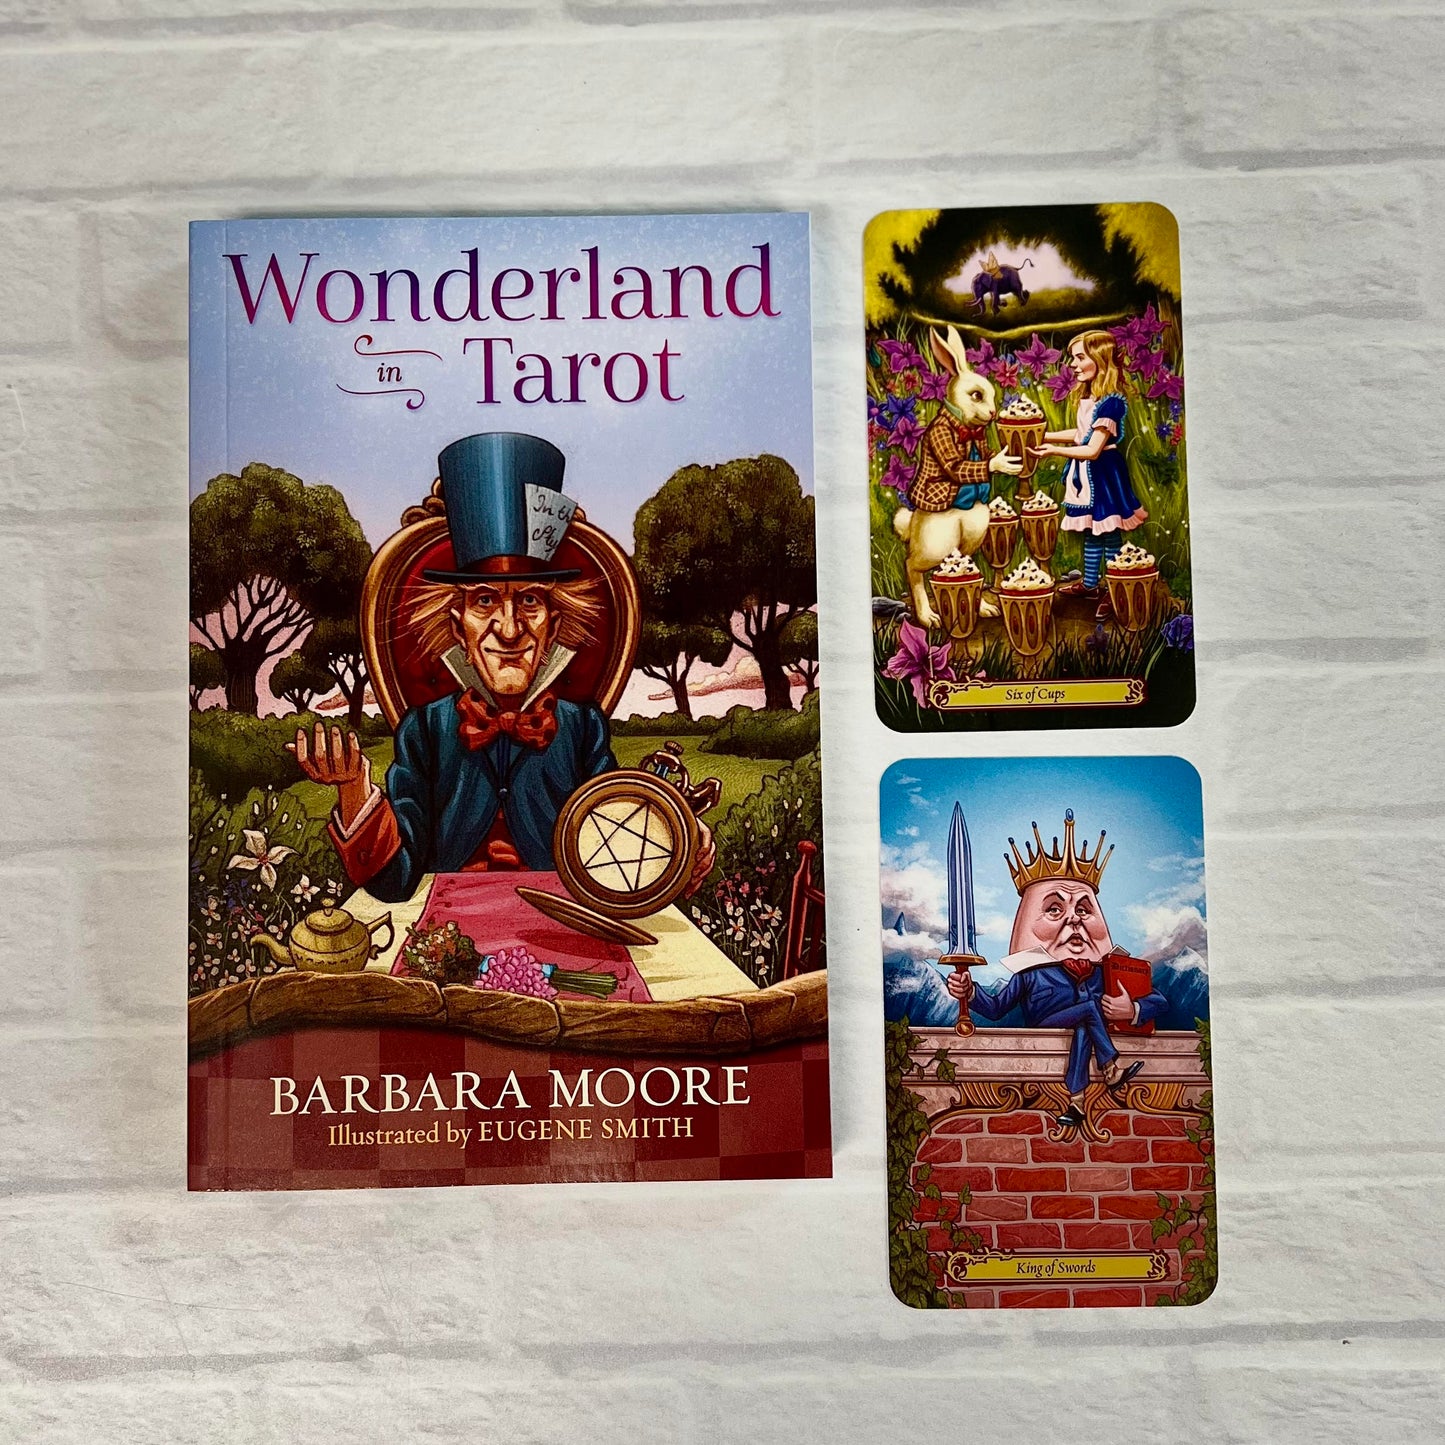 Tarot in Wonderland by Barbara Moore (Illustrated by Eugene Smith)